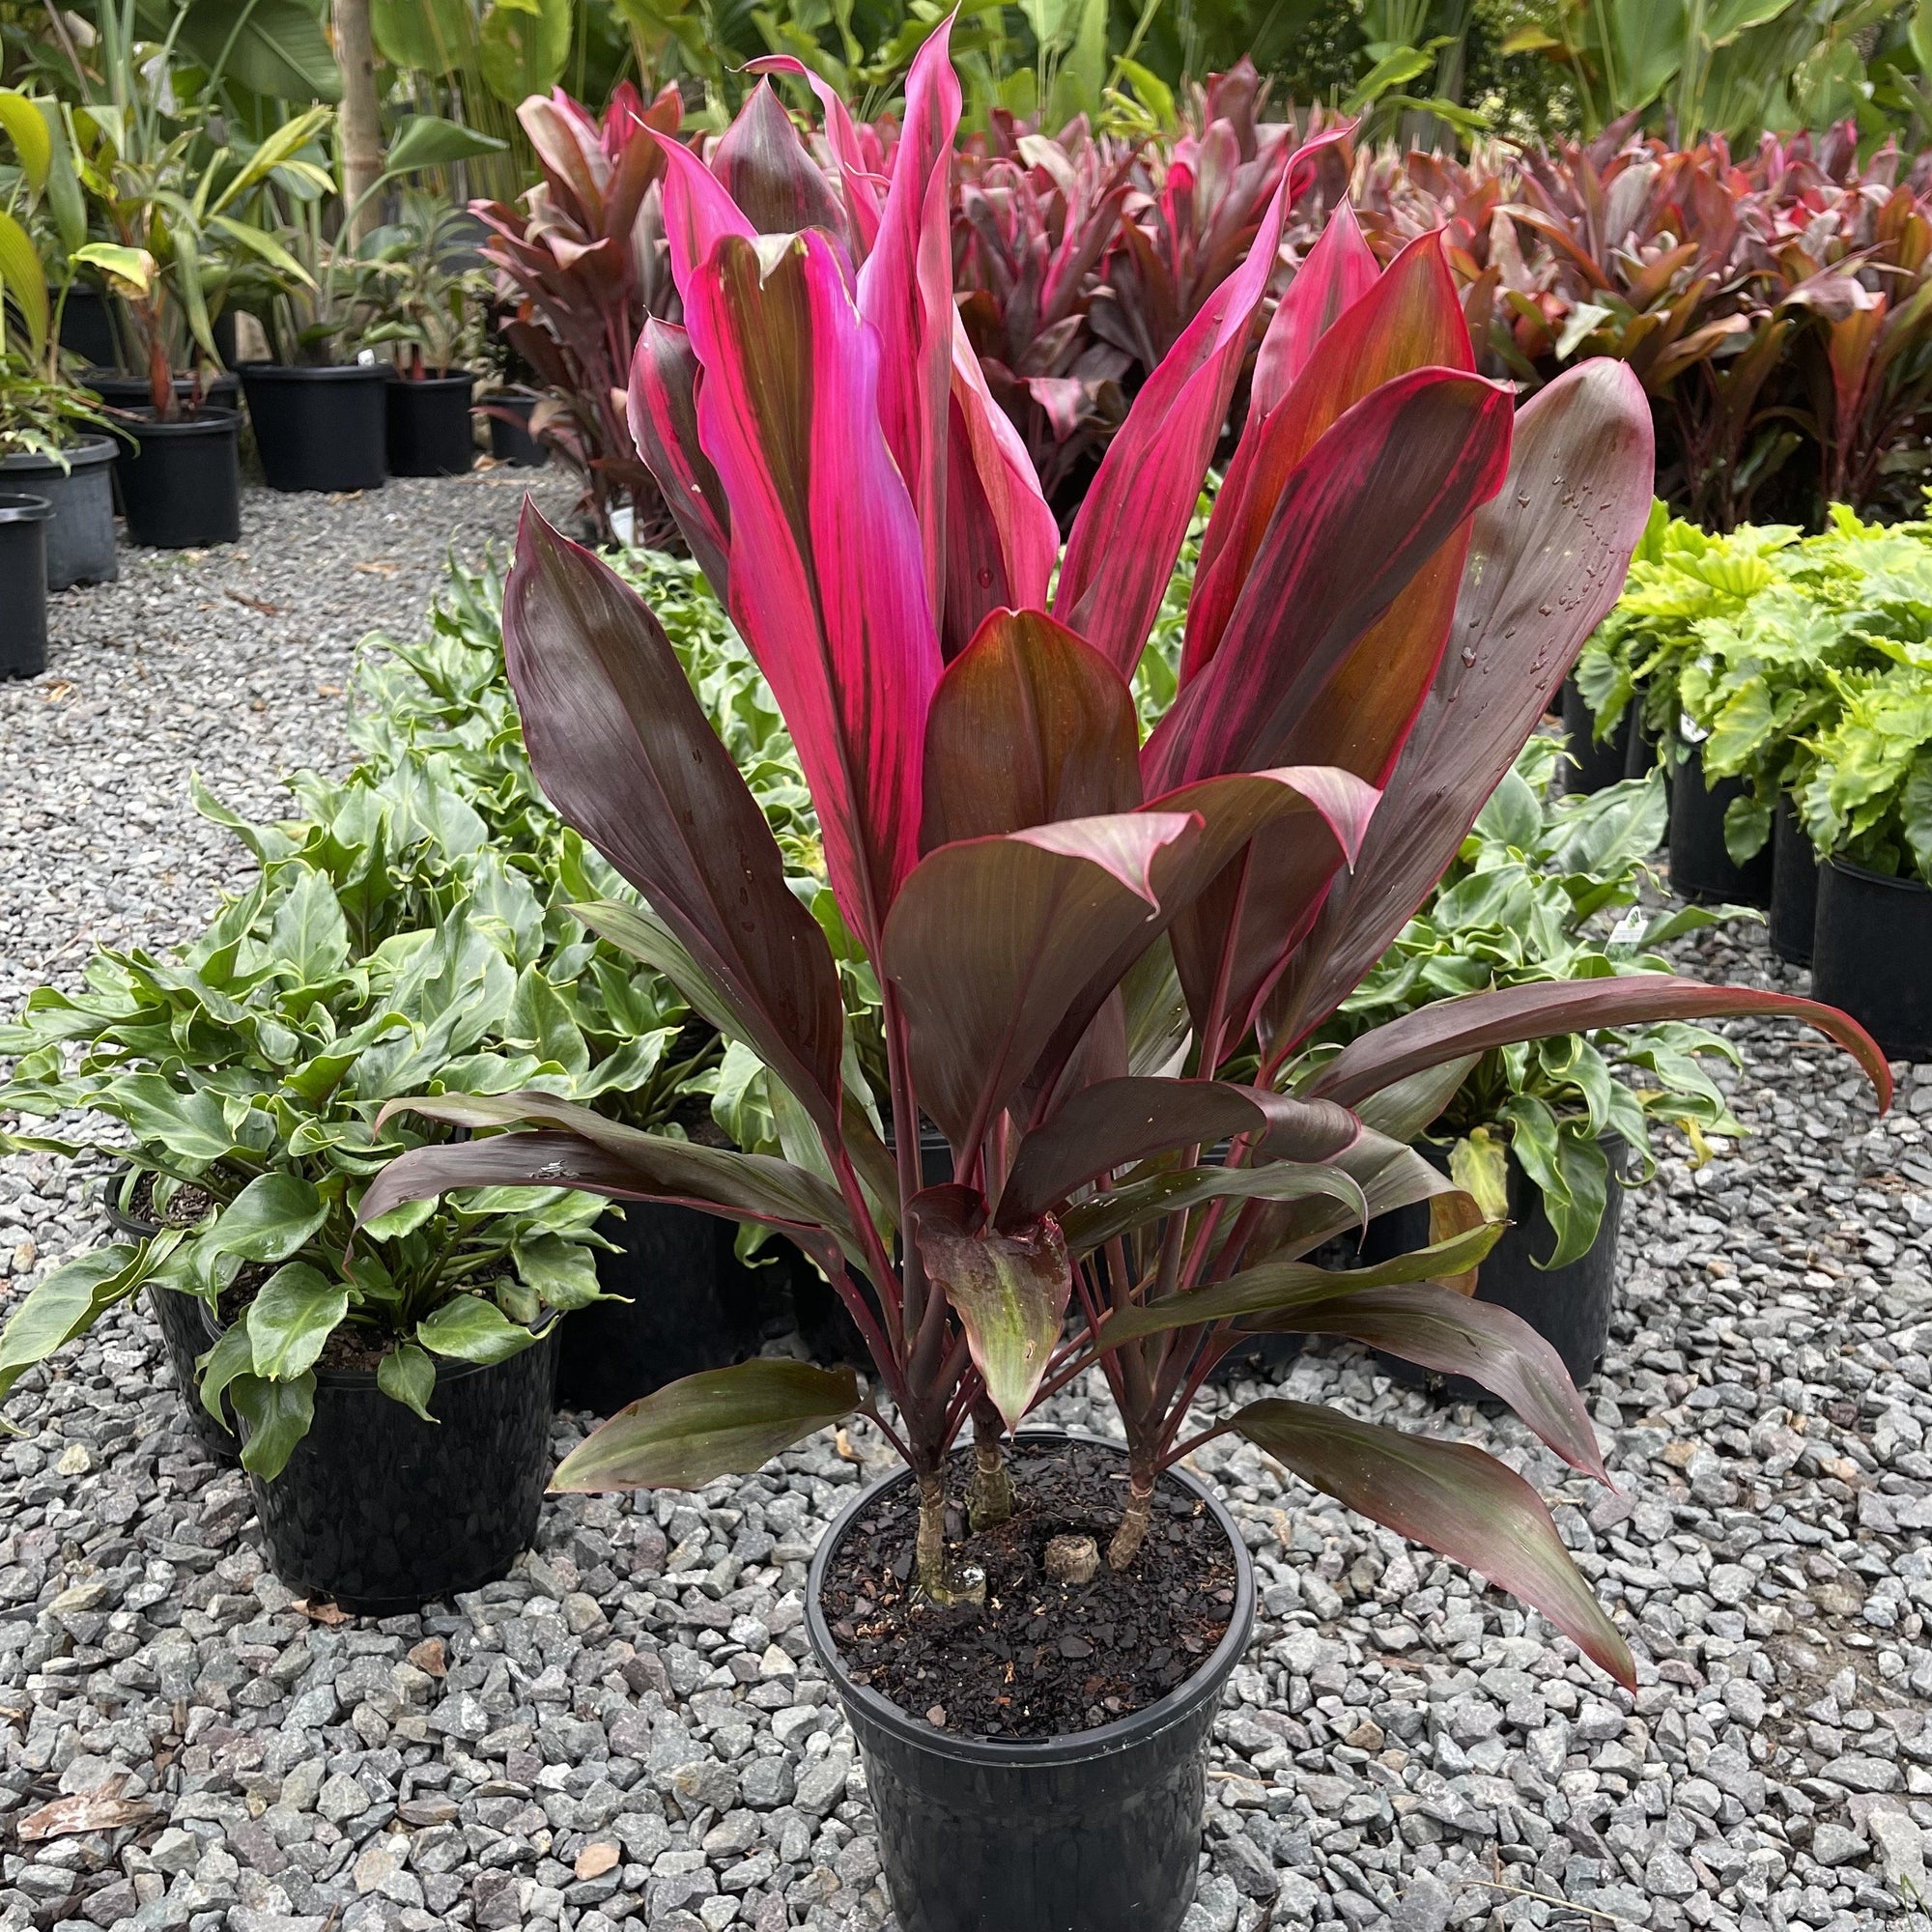 A very bright purple cordyline that takes full sun and gets hues of orange and red